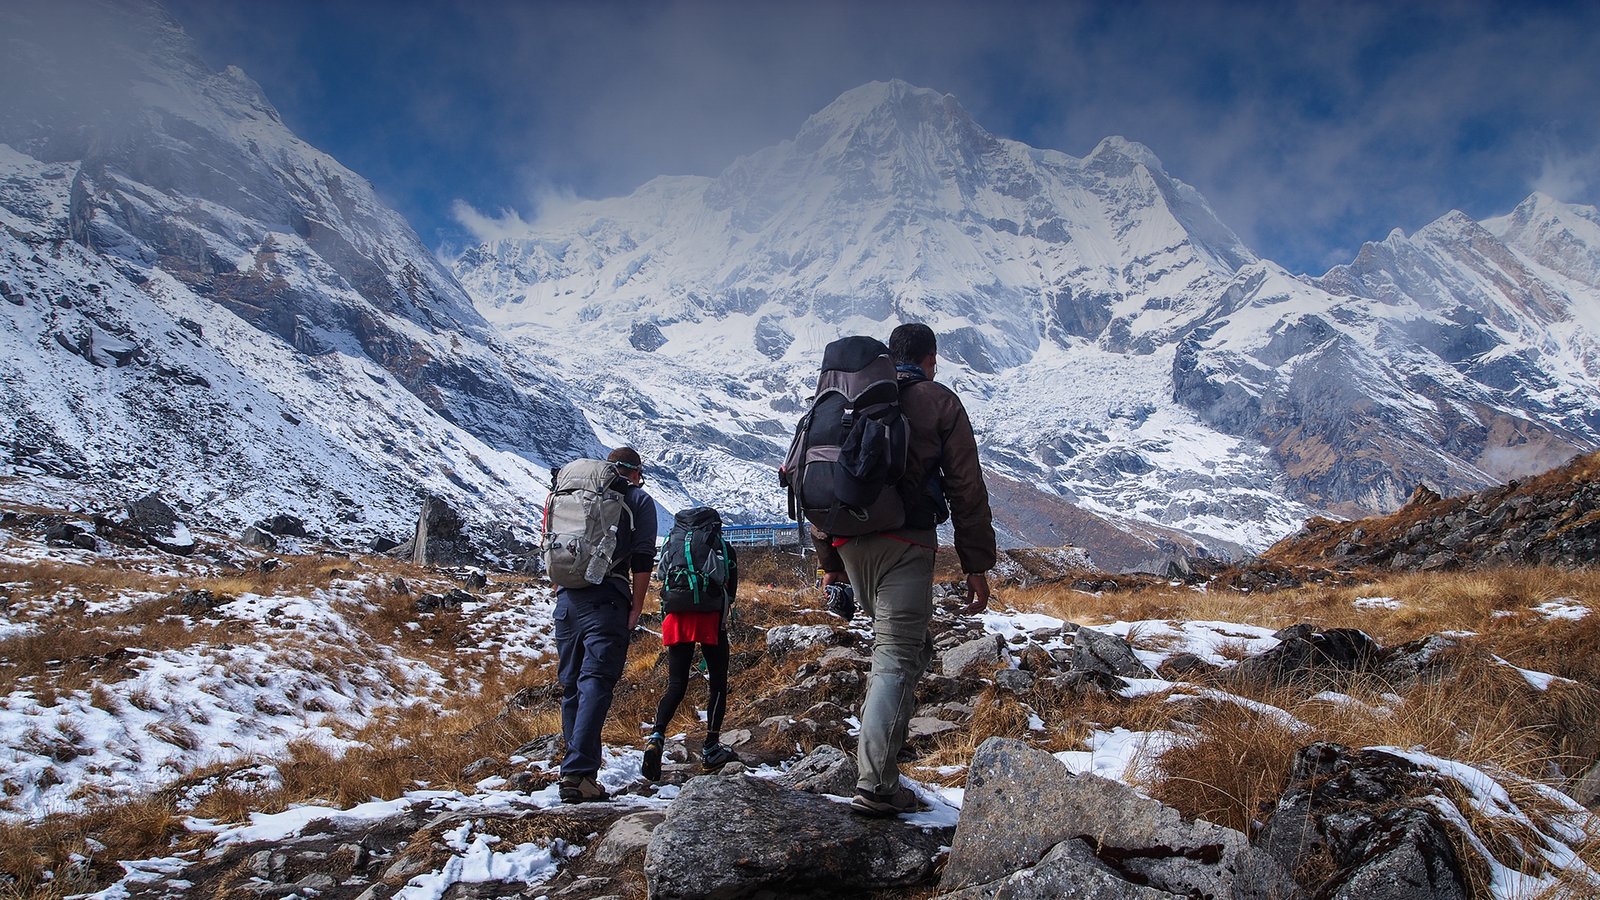 Day 05: Trek from MBC to Annapurna base camp (4130m) and trek back to Dovan (2600m)